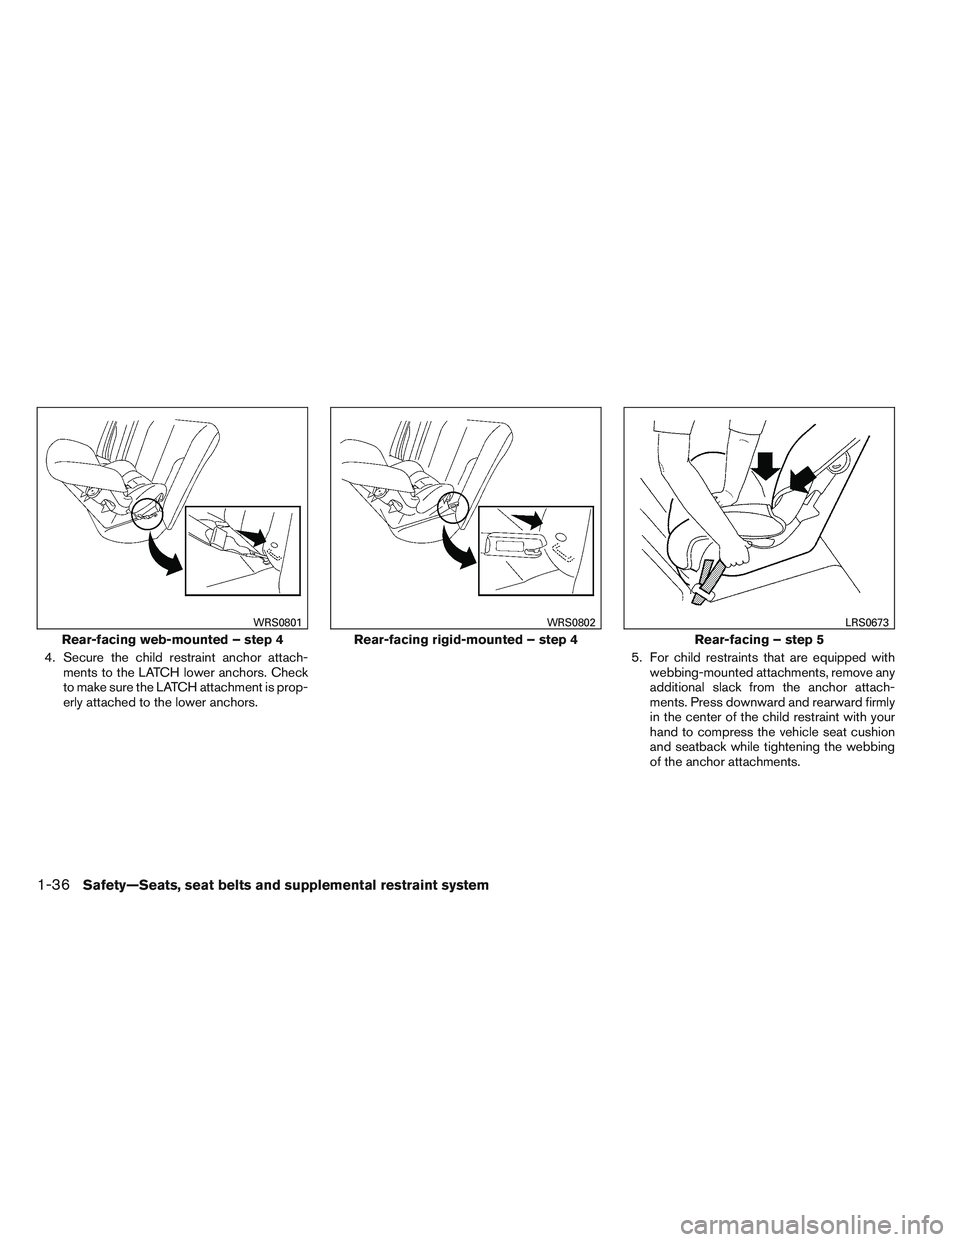 NISSAN FRONTIER 2012  Owner´s Manual 4. Secure the child restraint anchor attach-ments to the LATCH lower anchors. Check
to make sure the LATCH attachment is prop-
erly attached to the lower anchors. 5. For child restraints that are equi